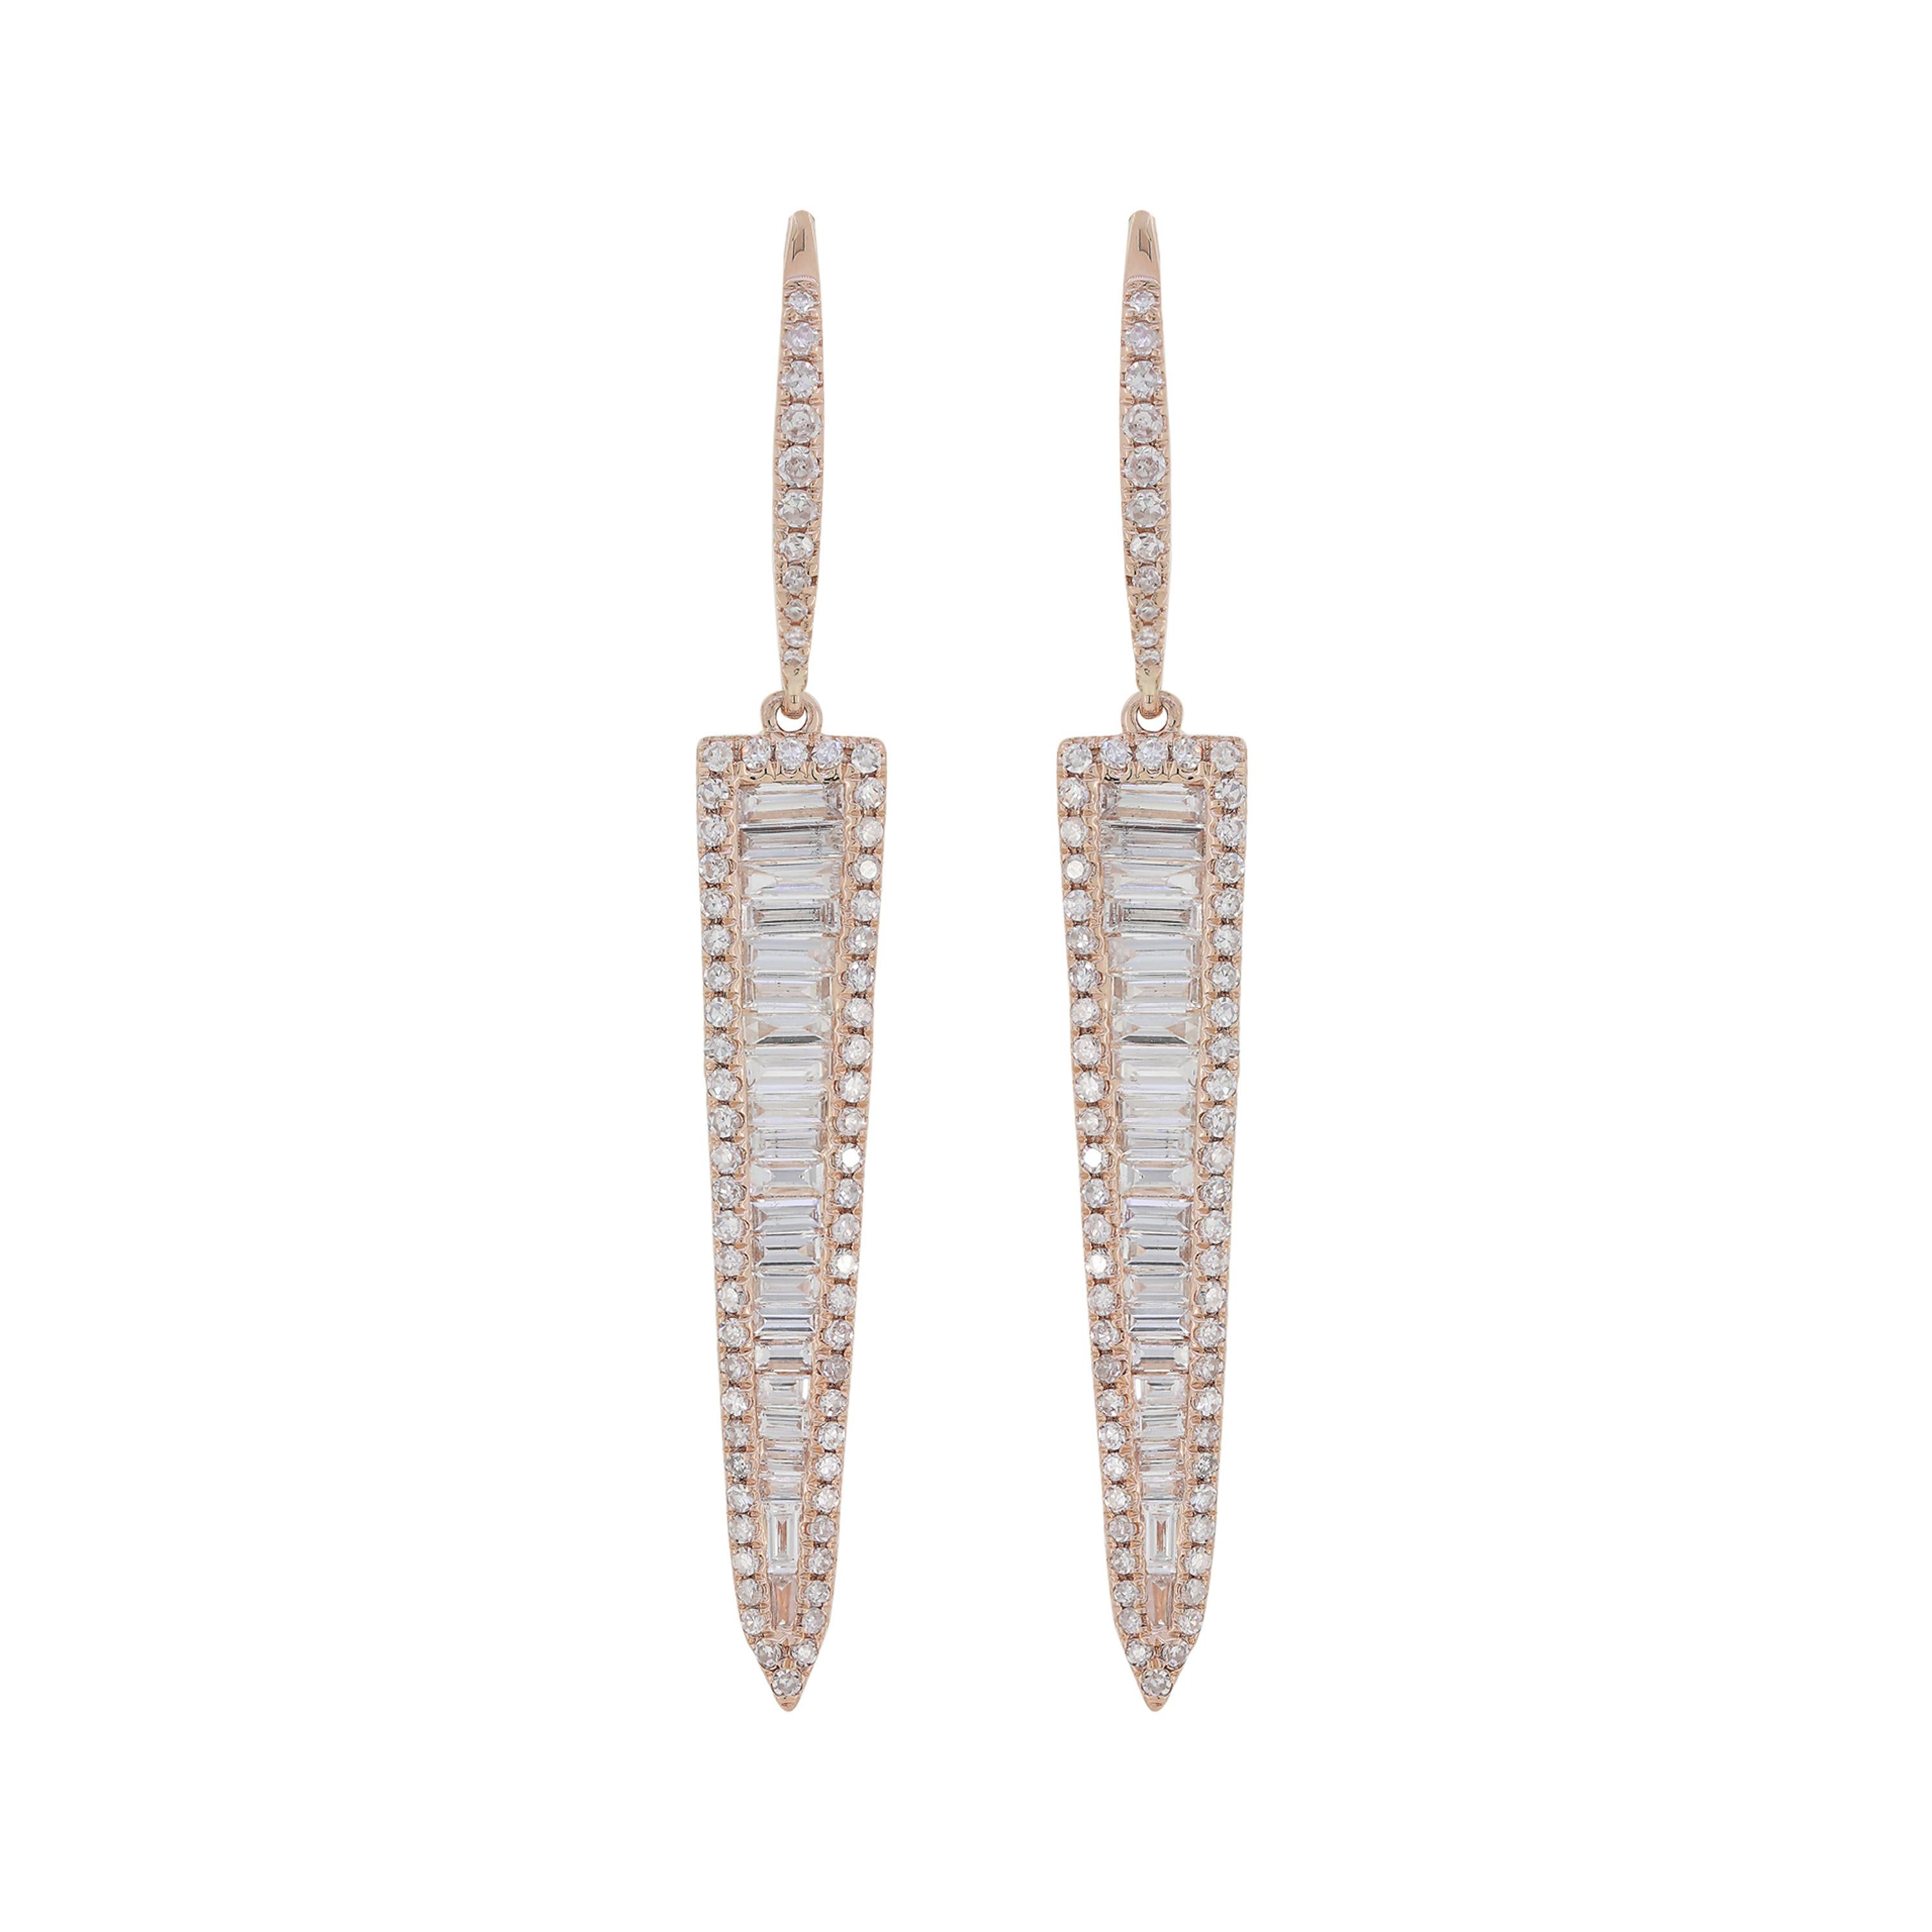 These Luxle Round and Baguette Diamond Triangular Drop Earrings are a perfect pair to brighten up your day. Adorned with baguette diamonds framed within round diamonds totaling 1.27Cts in triangular motifs of 14K rose gold. These rose gold drops are